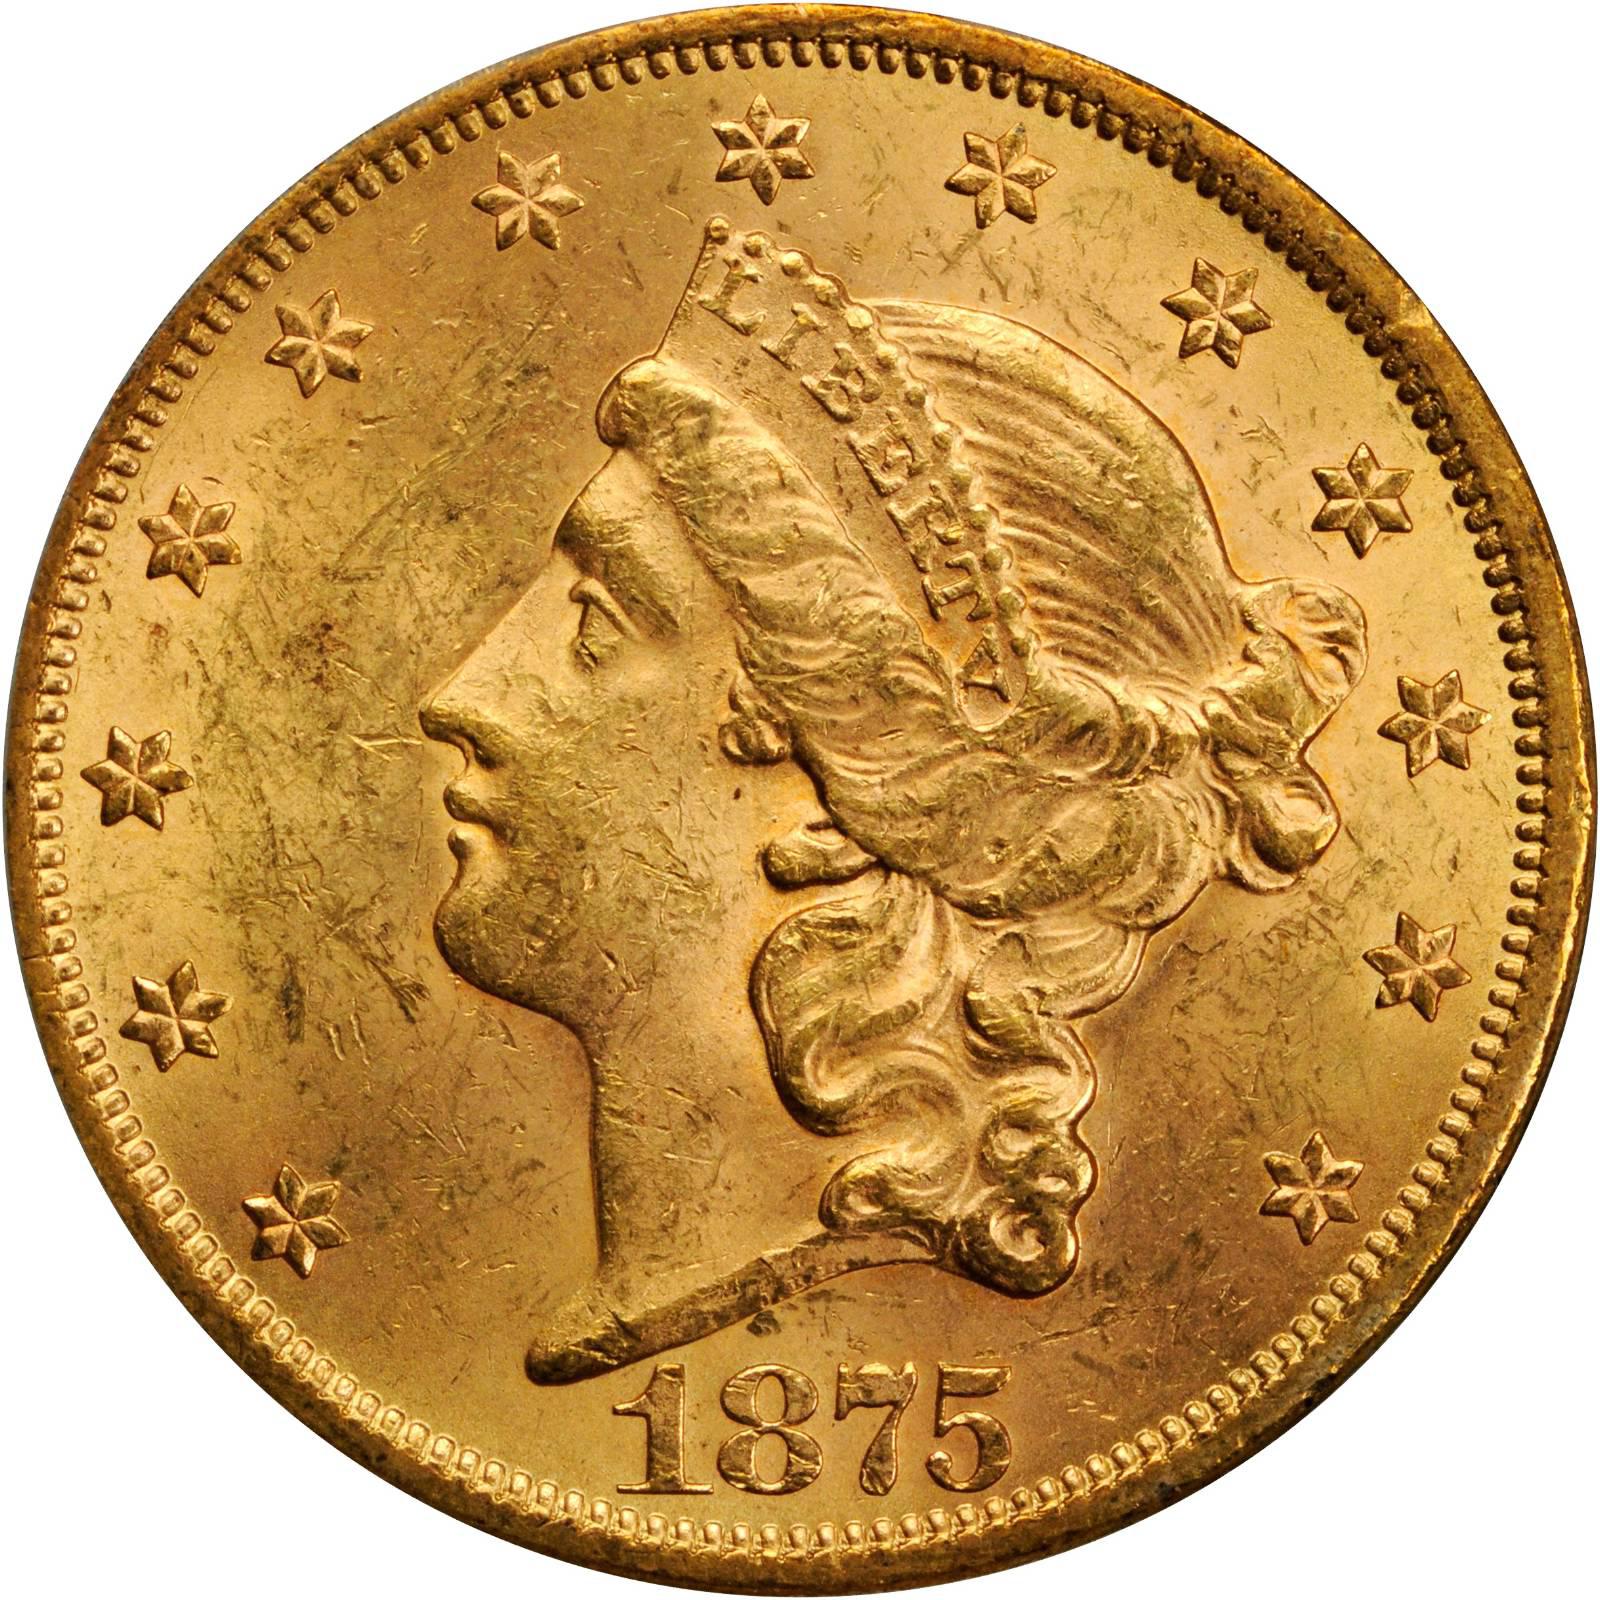 Value of 1875 $20 Liberty Double Eagle - Sell Rare Coins